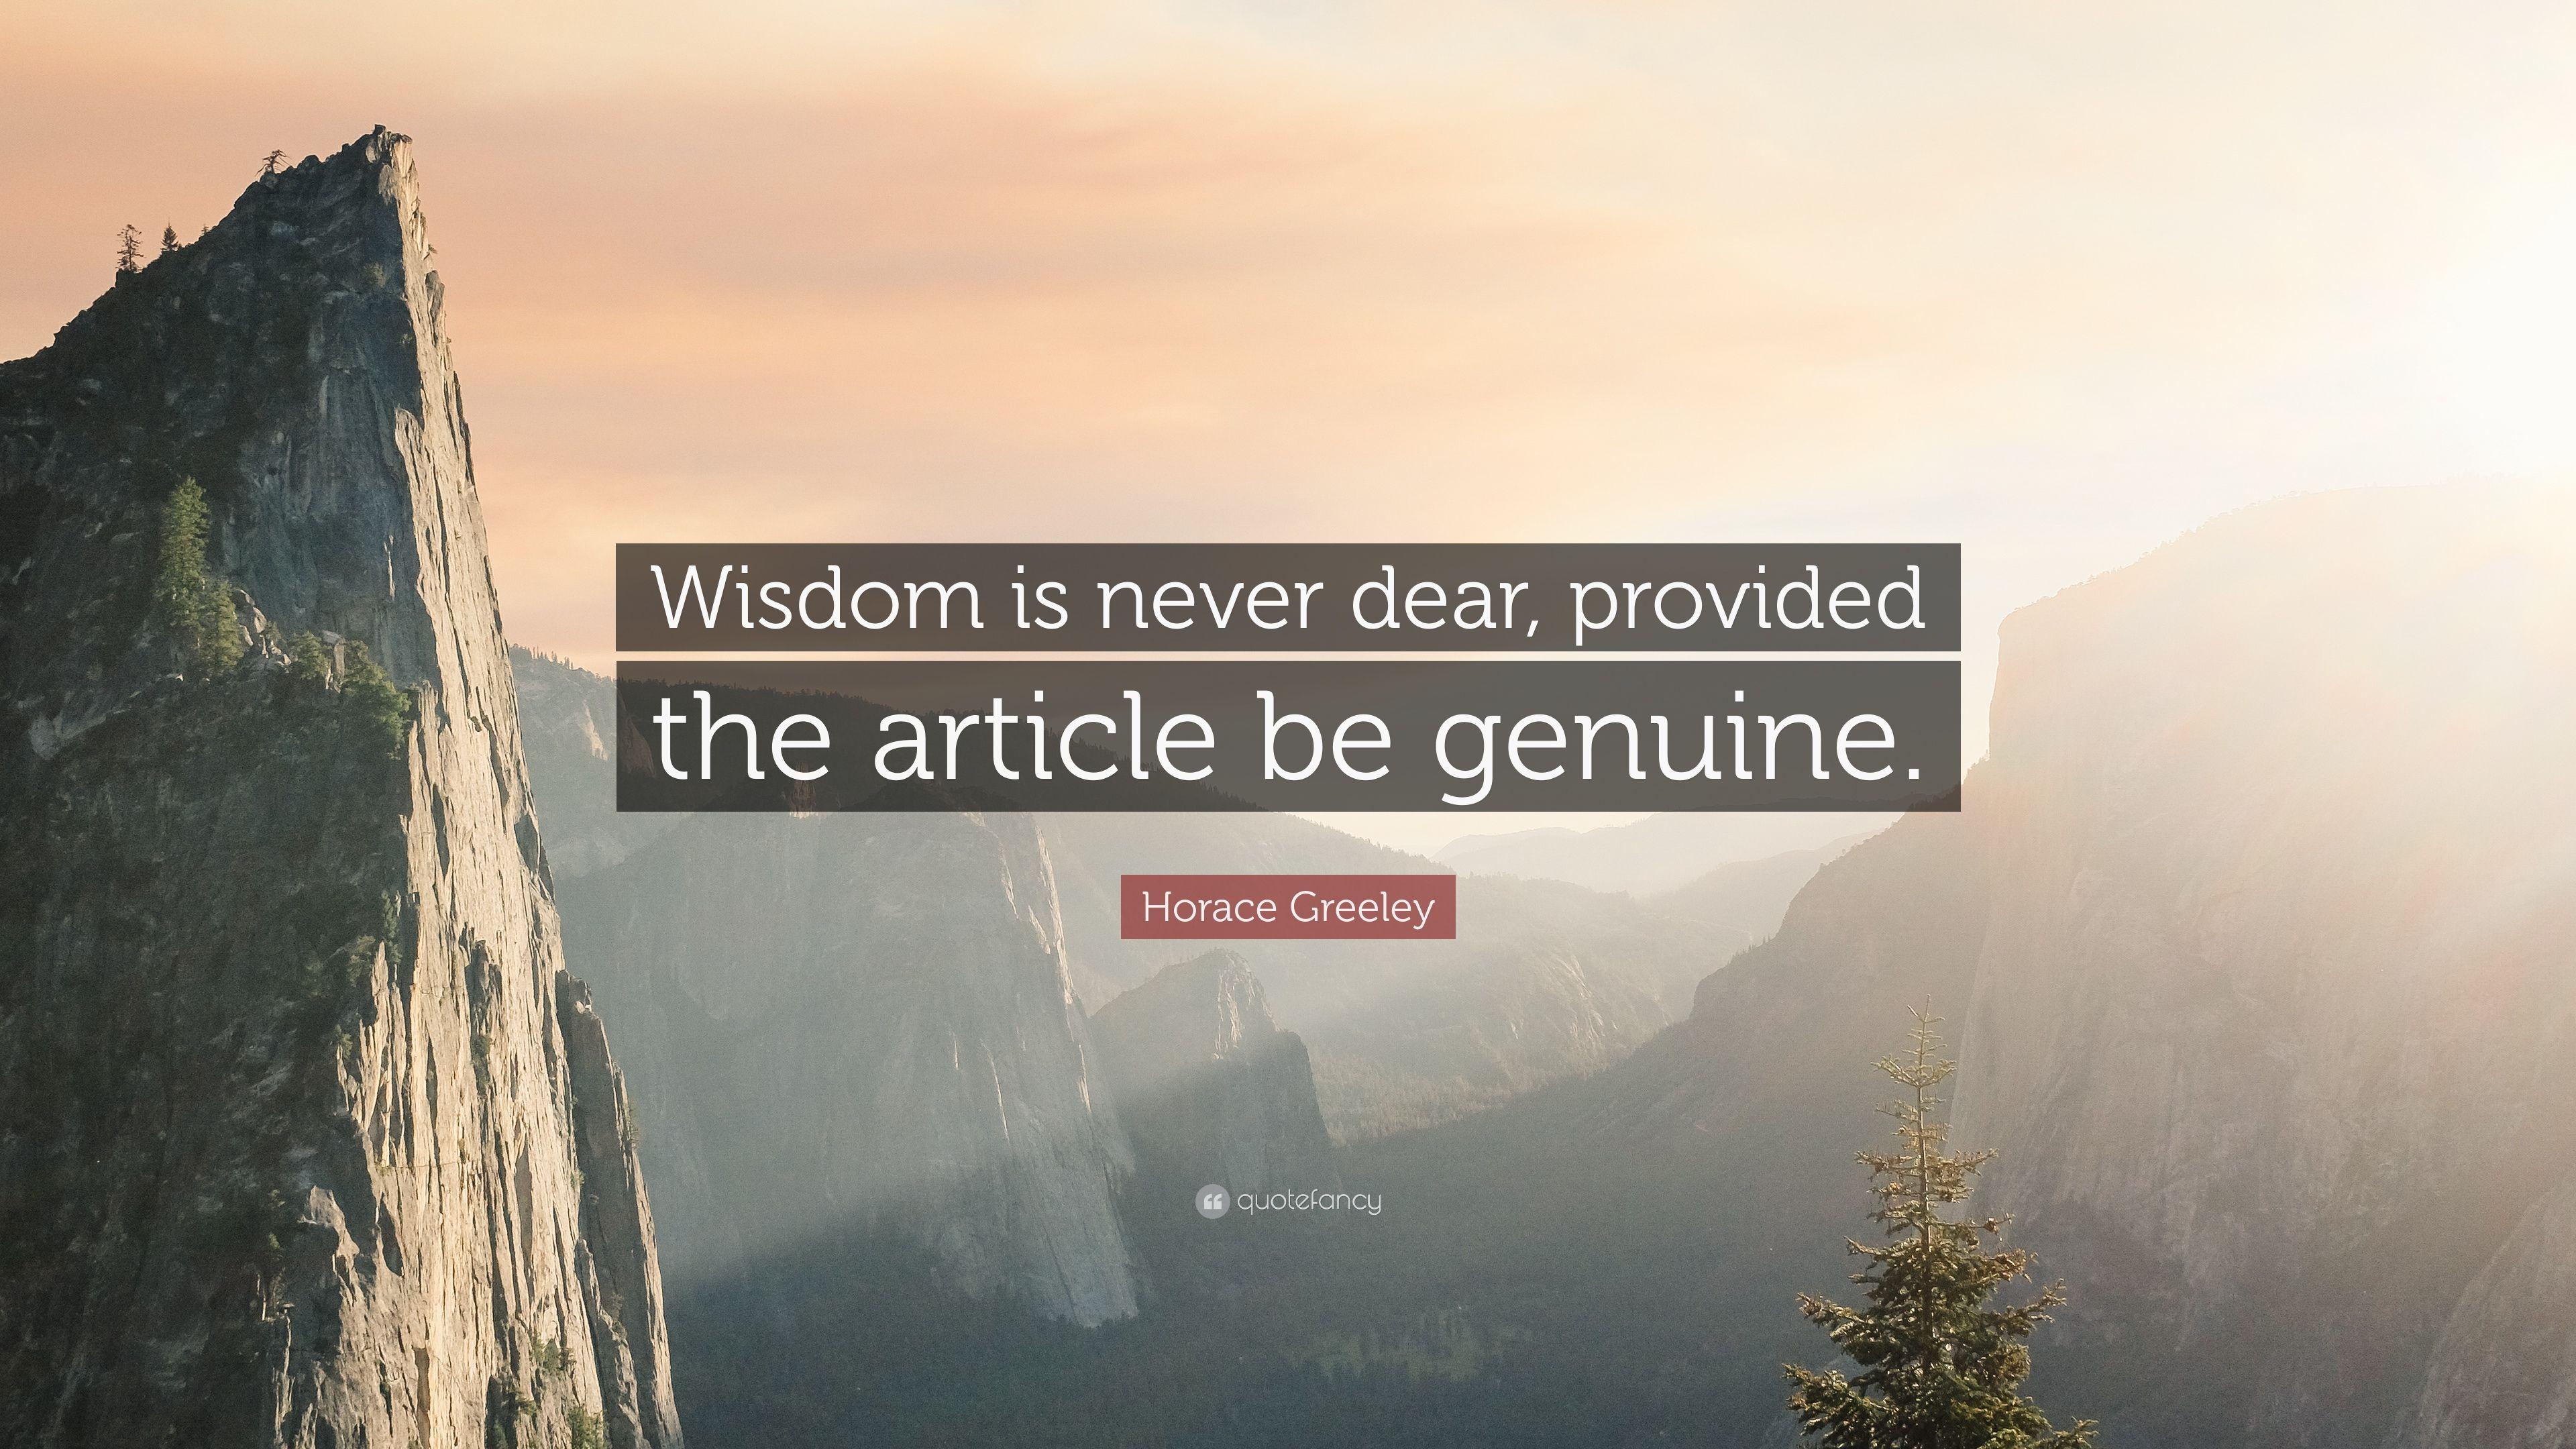 Horace Greeley Quote: “Wisdom is never dear, provided the article be